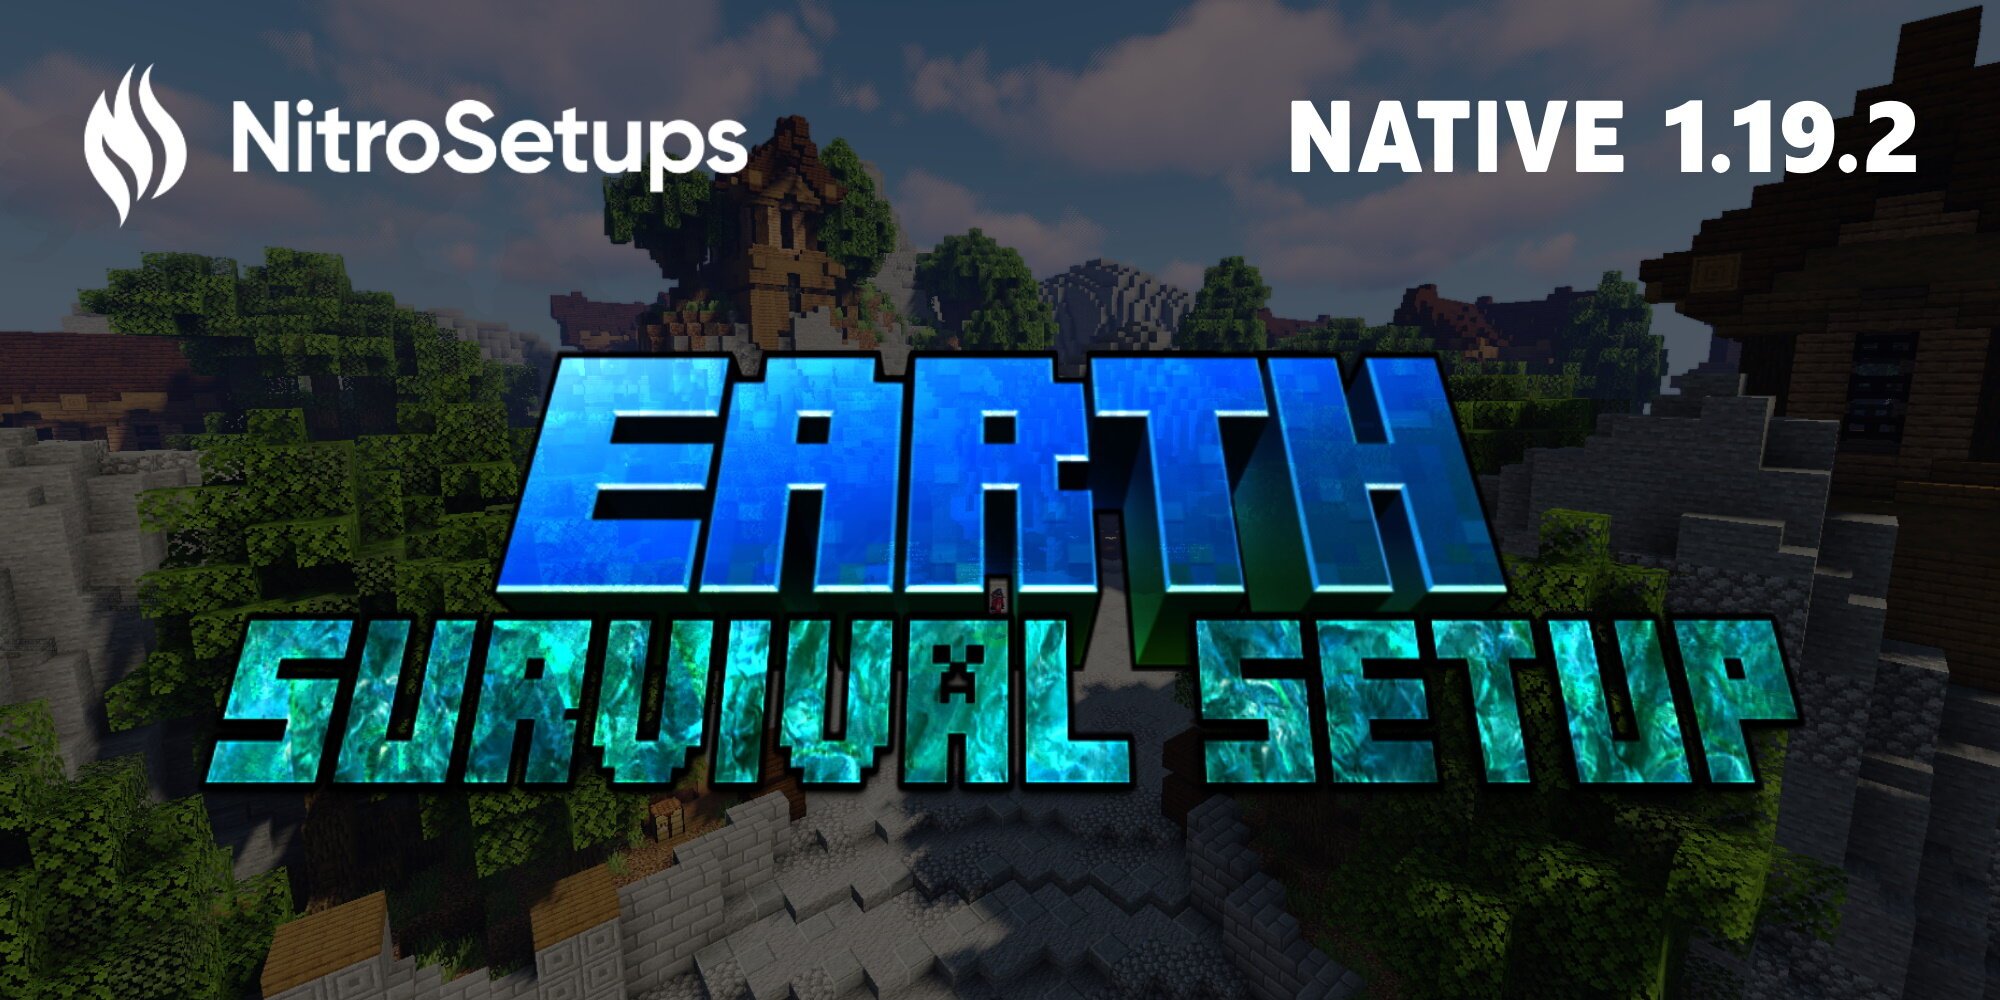 How To Get The Earth Survival Map In Minecraft